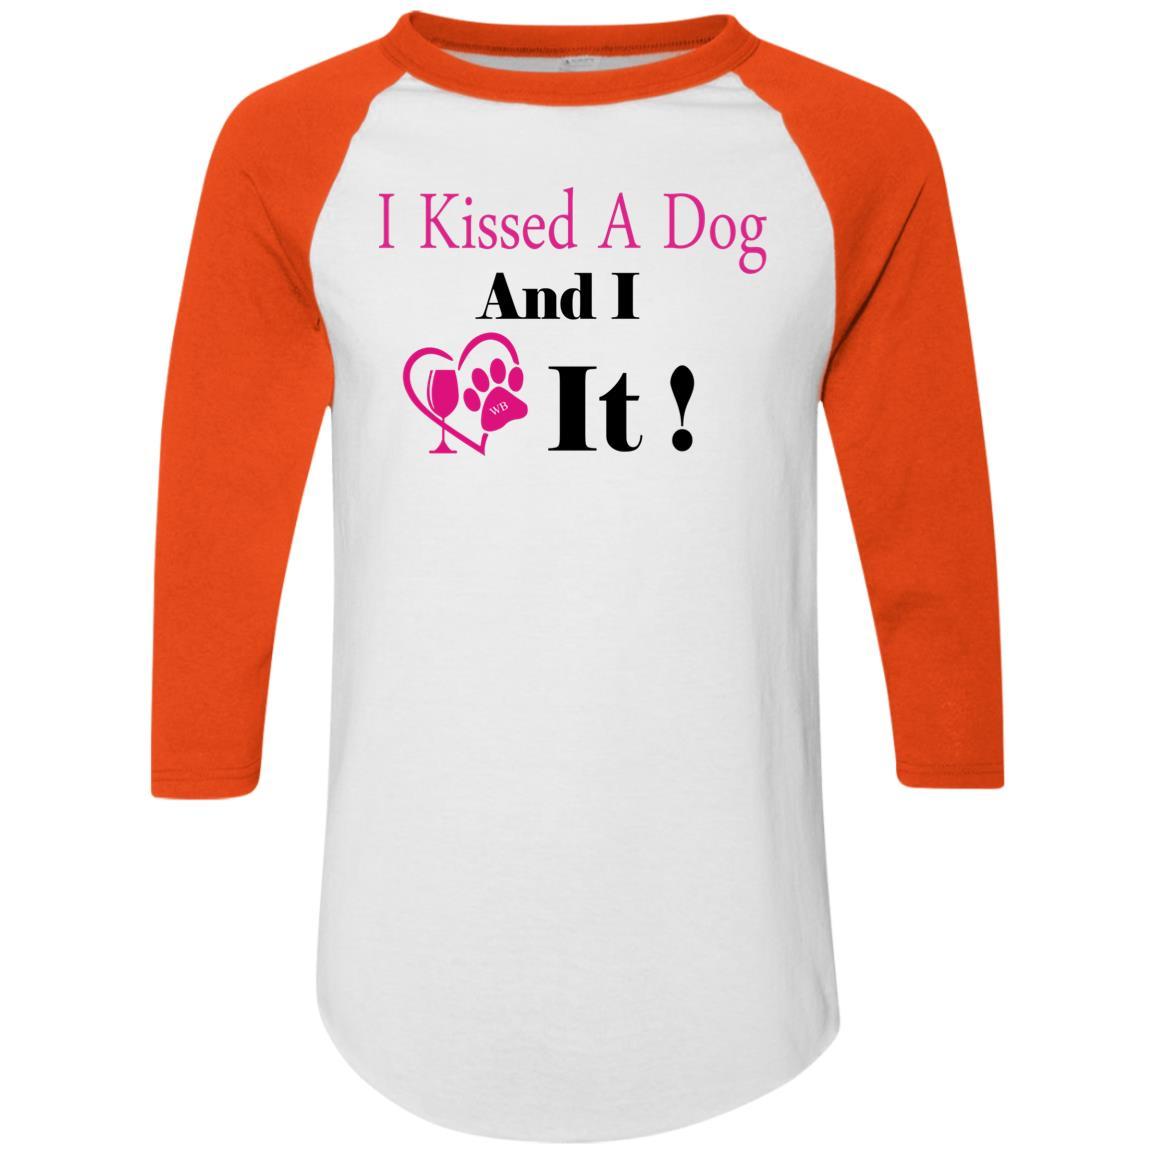 T-Shirts White/Orange / S WineyBitches.co "I Kissed A Dog And I Loved It:" Colorblock Raglan Jersey WineyBitchesCo